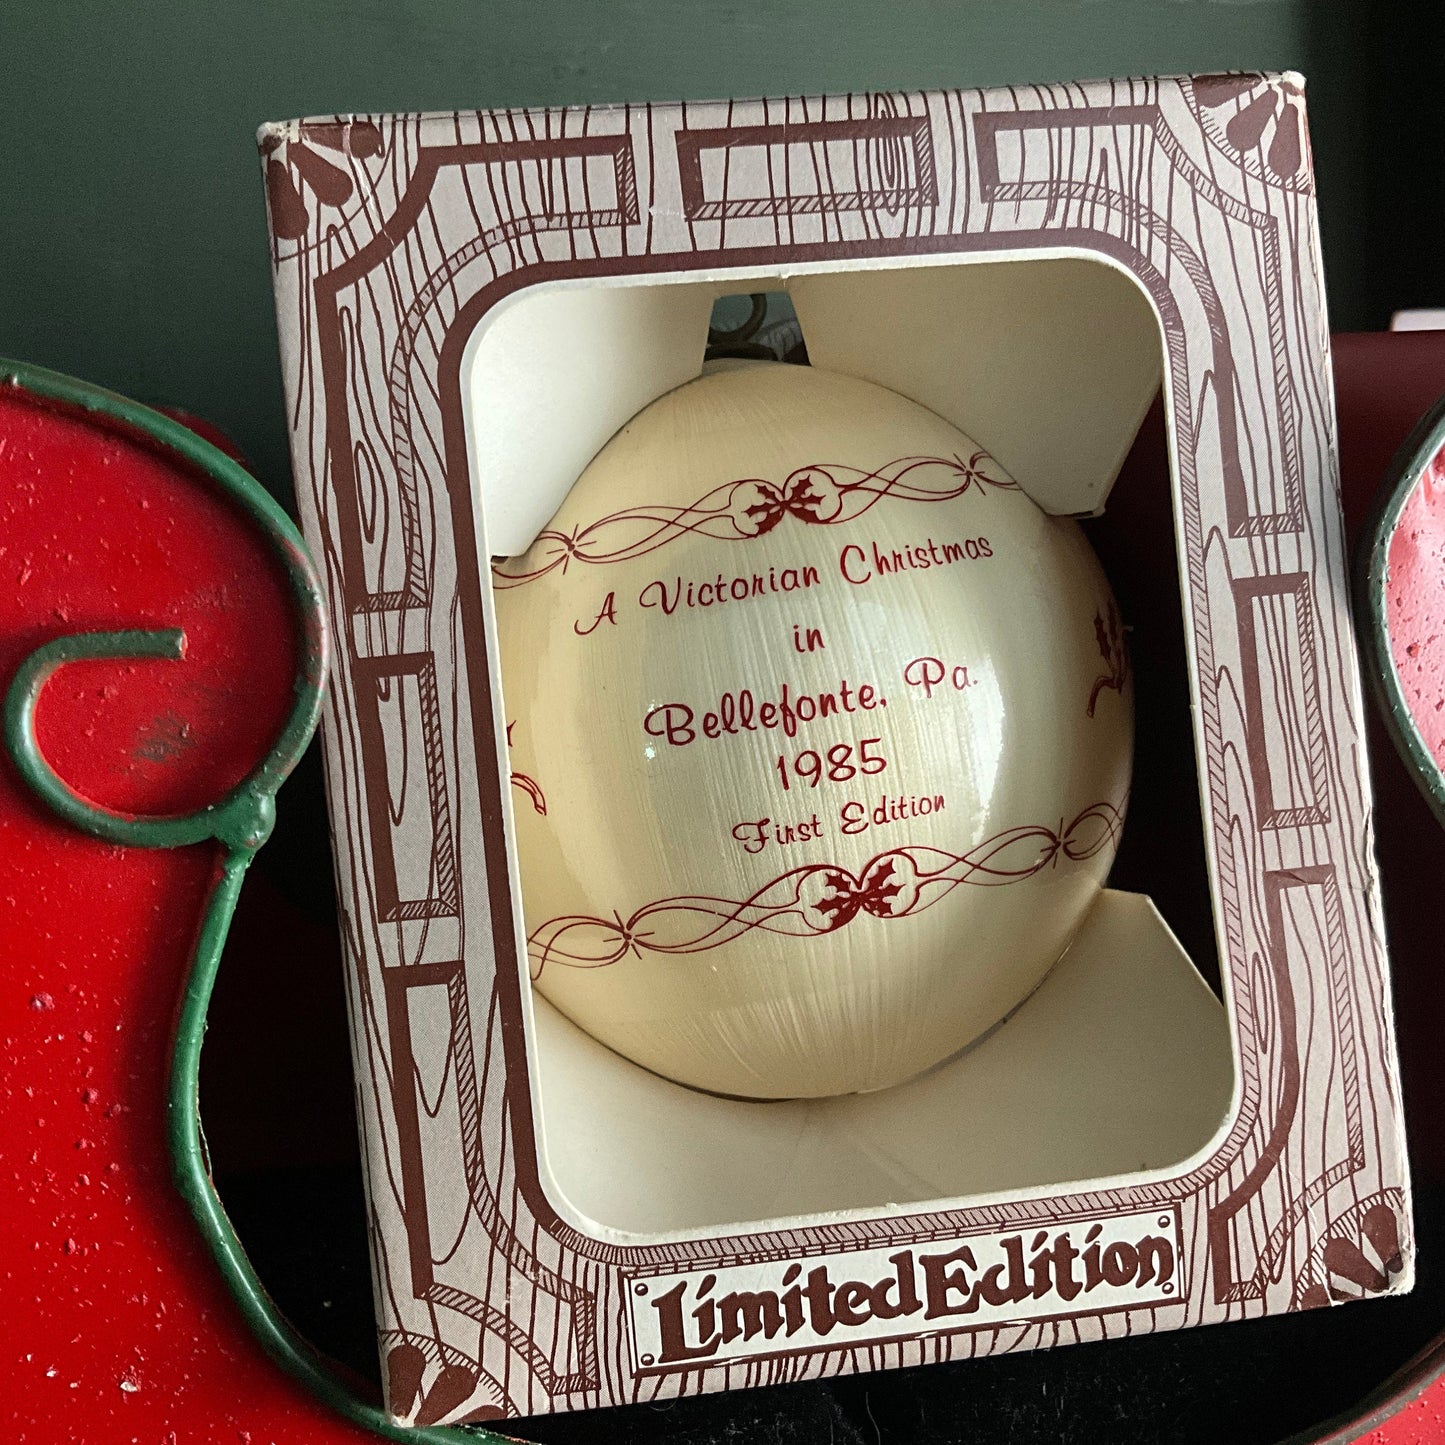 Bellefonte Victorian Christmas depicting Bellefonte, Pa. train station 1889 dated 1985 ball ornament